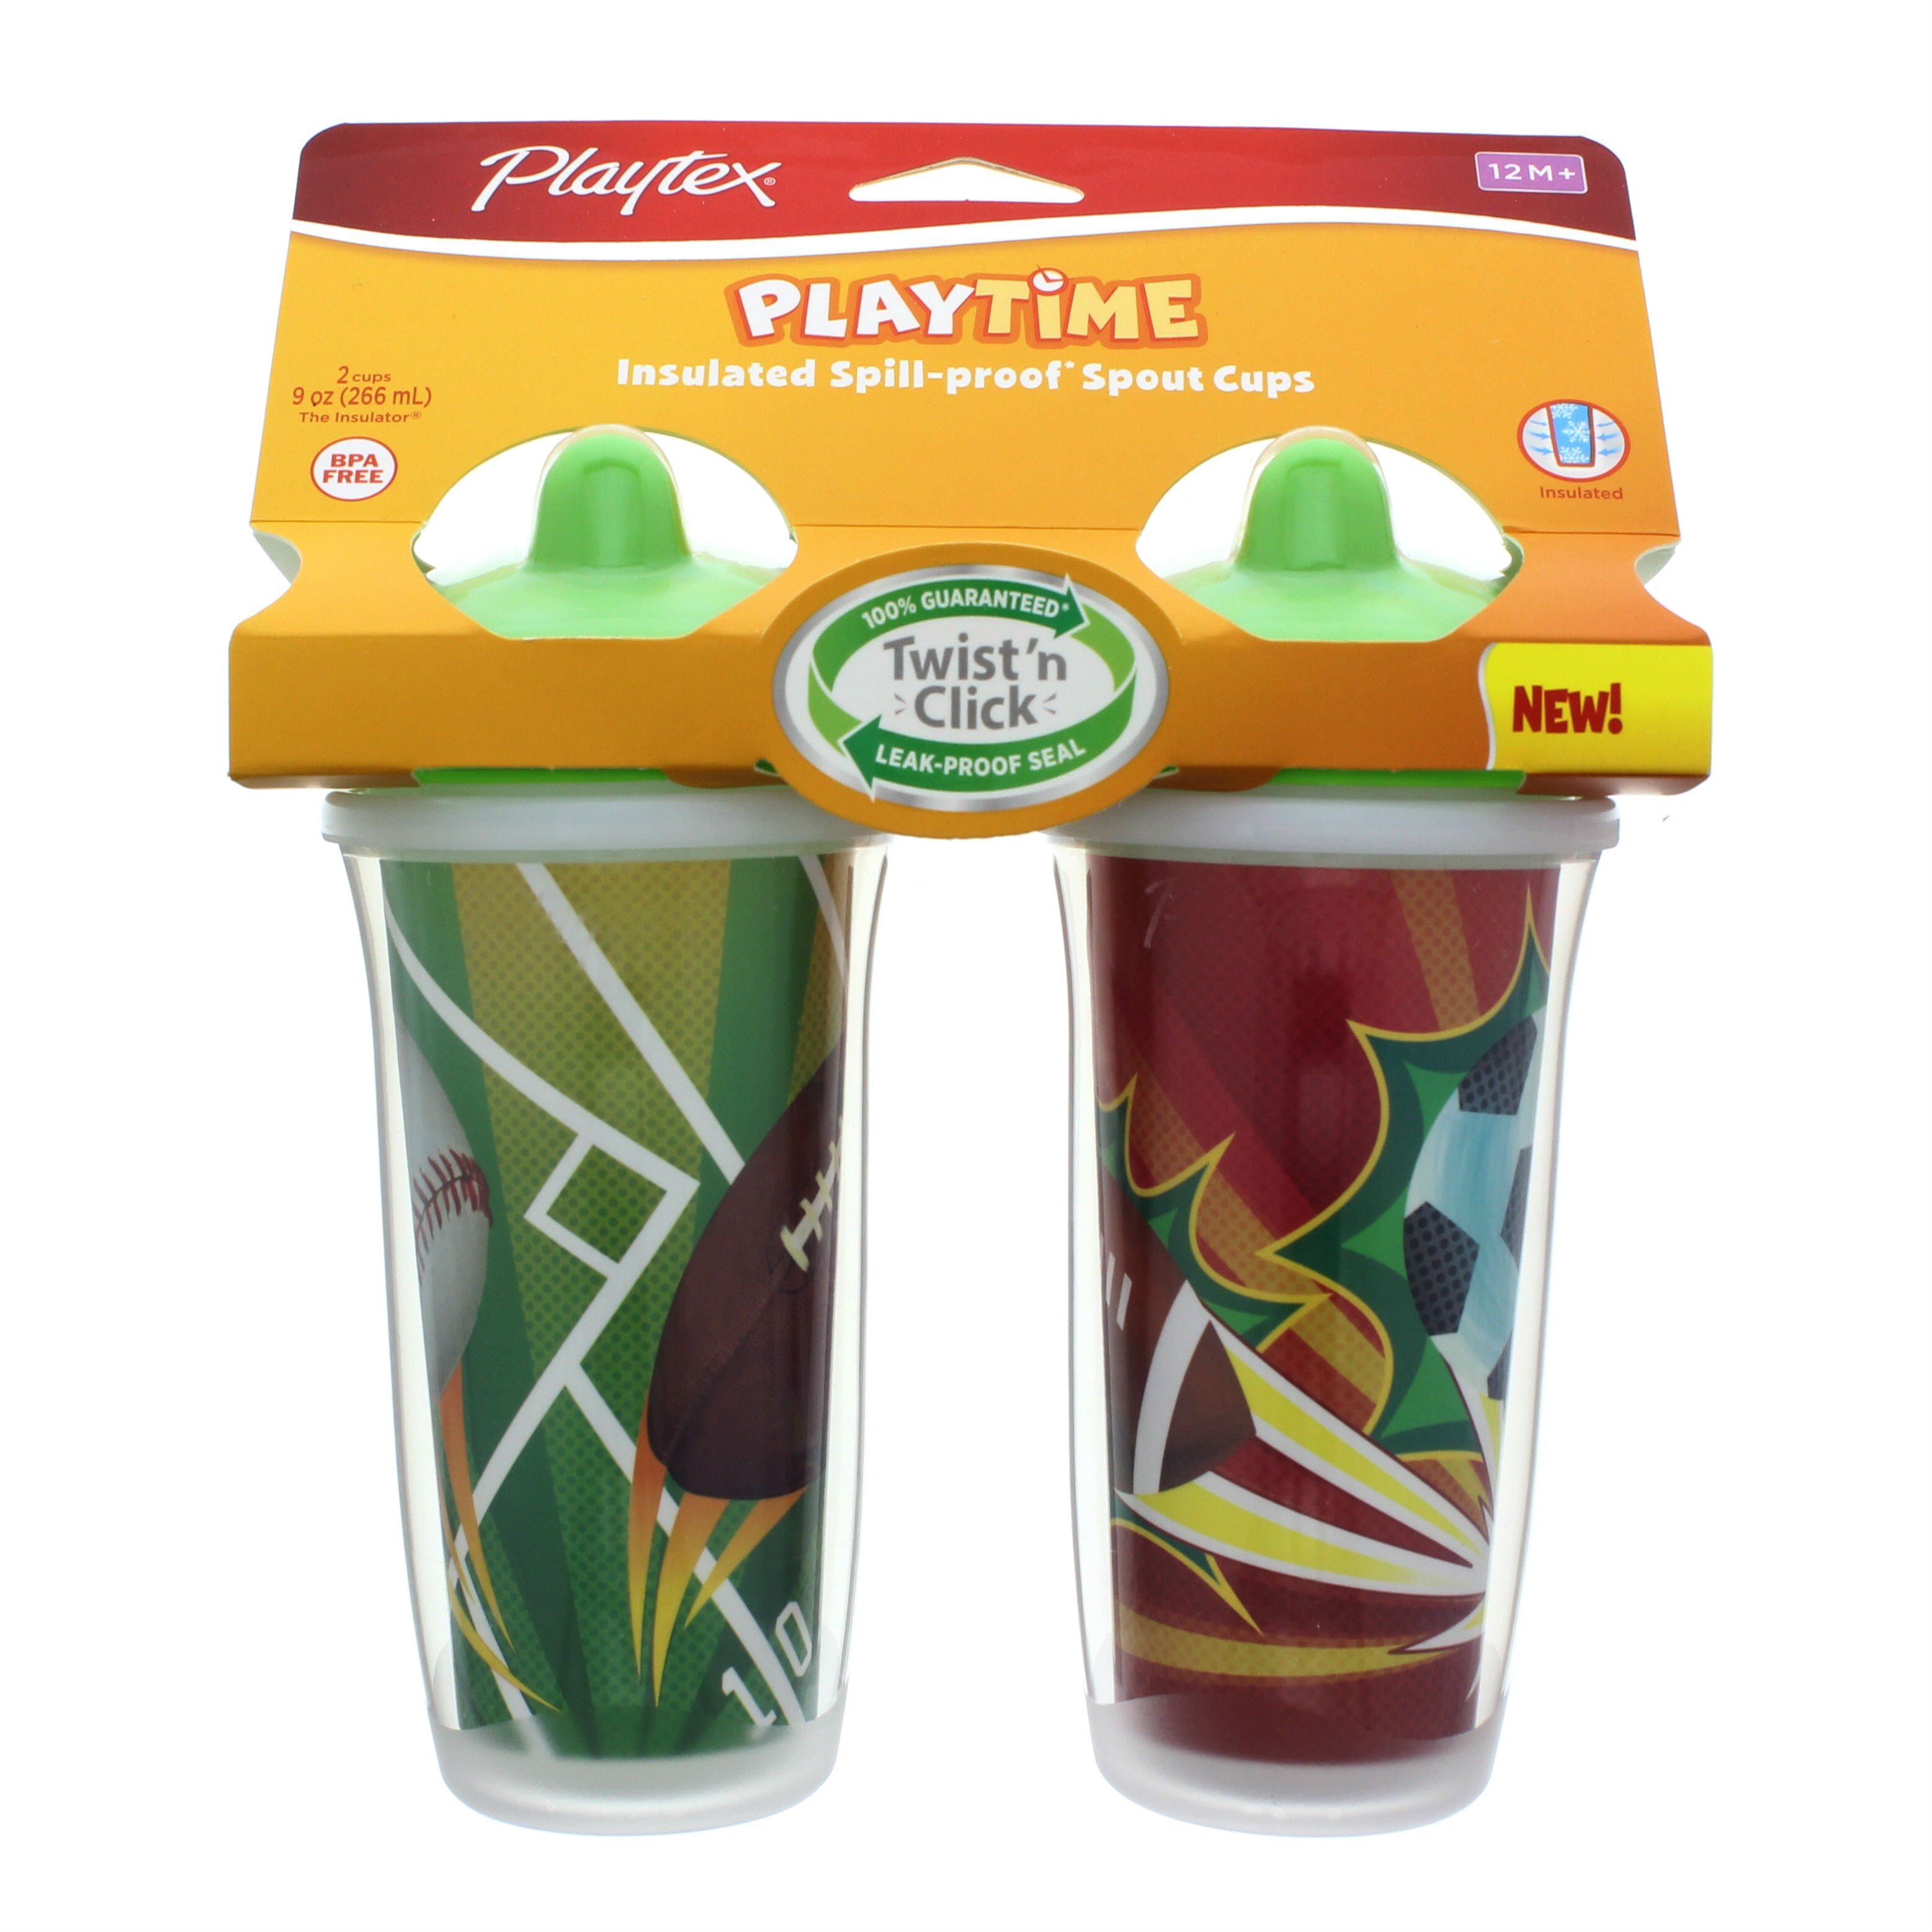 Playtex PlayTime 9 OZ Insulated Spill-Proof Cups, Assorted Colors